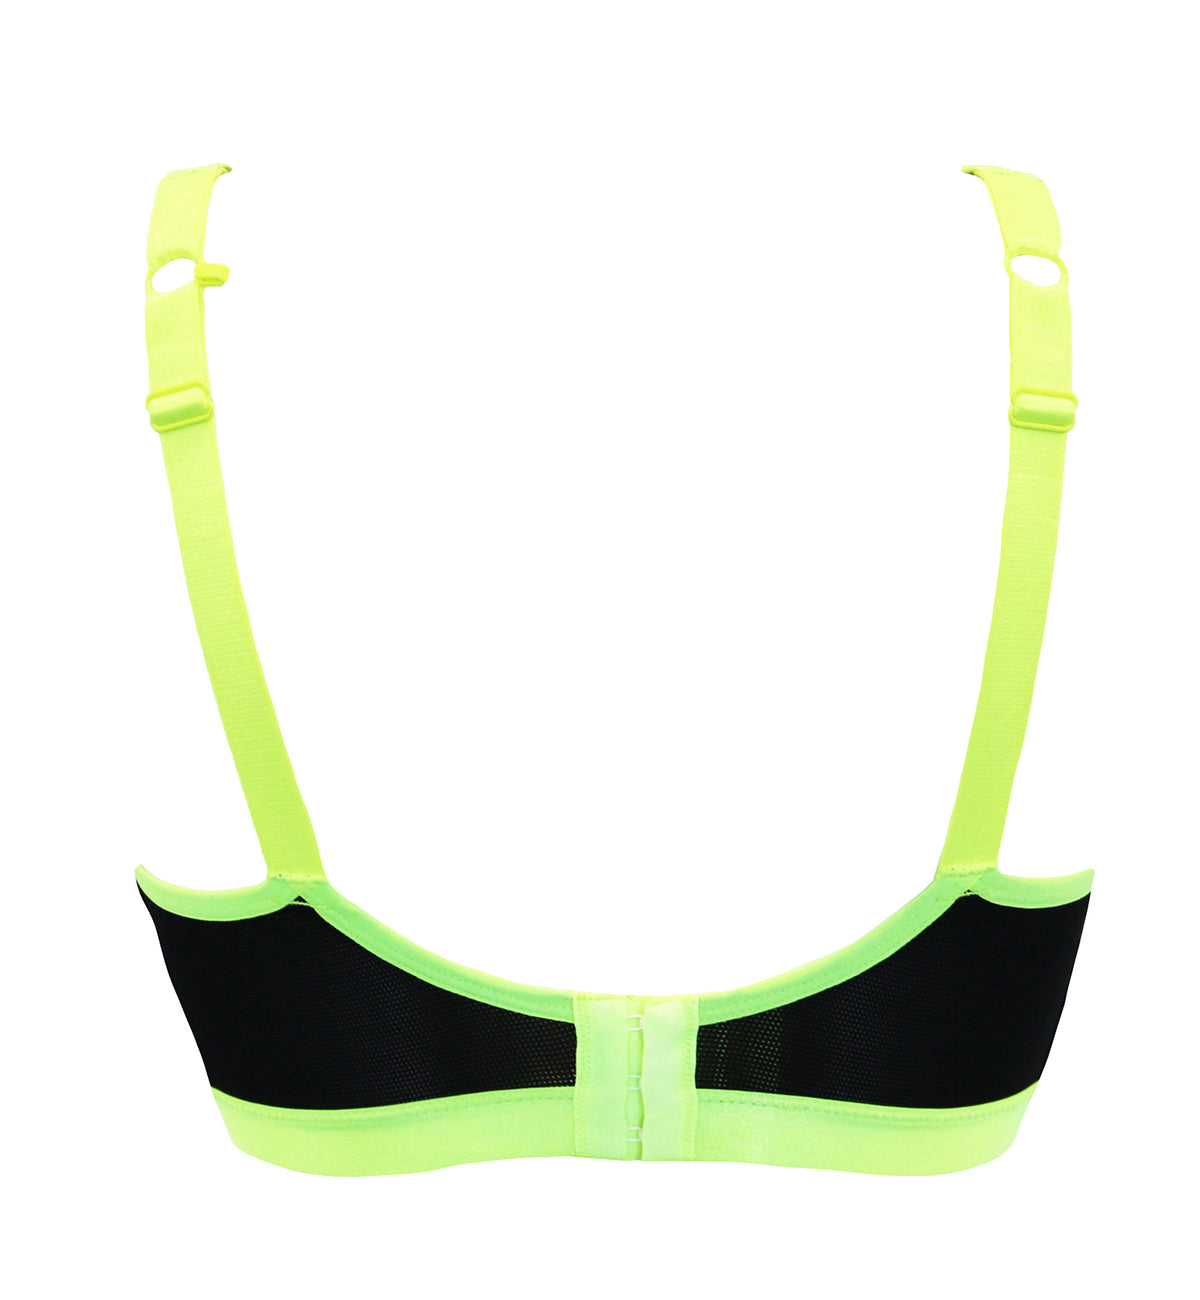 Pour Moi Energy Strive Non Wire Lined Full Cup Sports Bra (97010),34D,Leopard/Lime - Leopard/Lime,34D